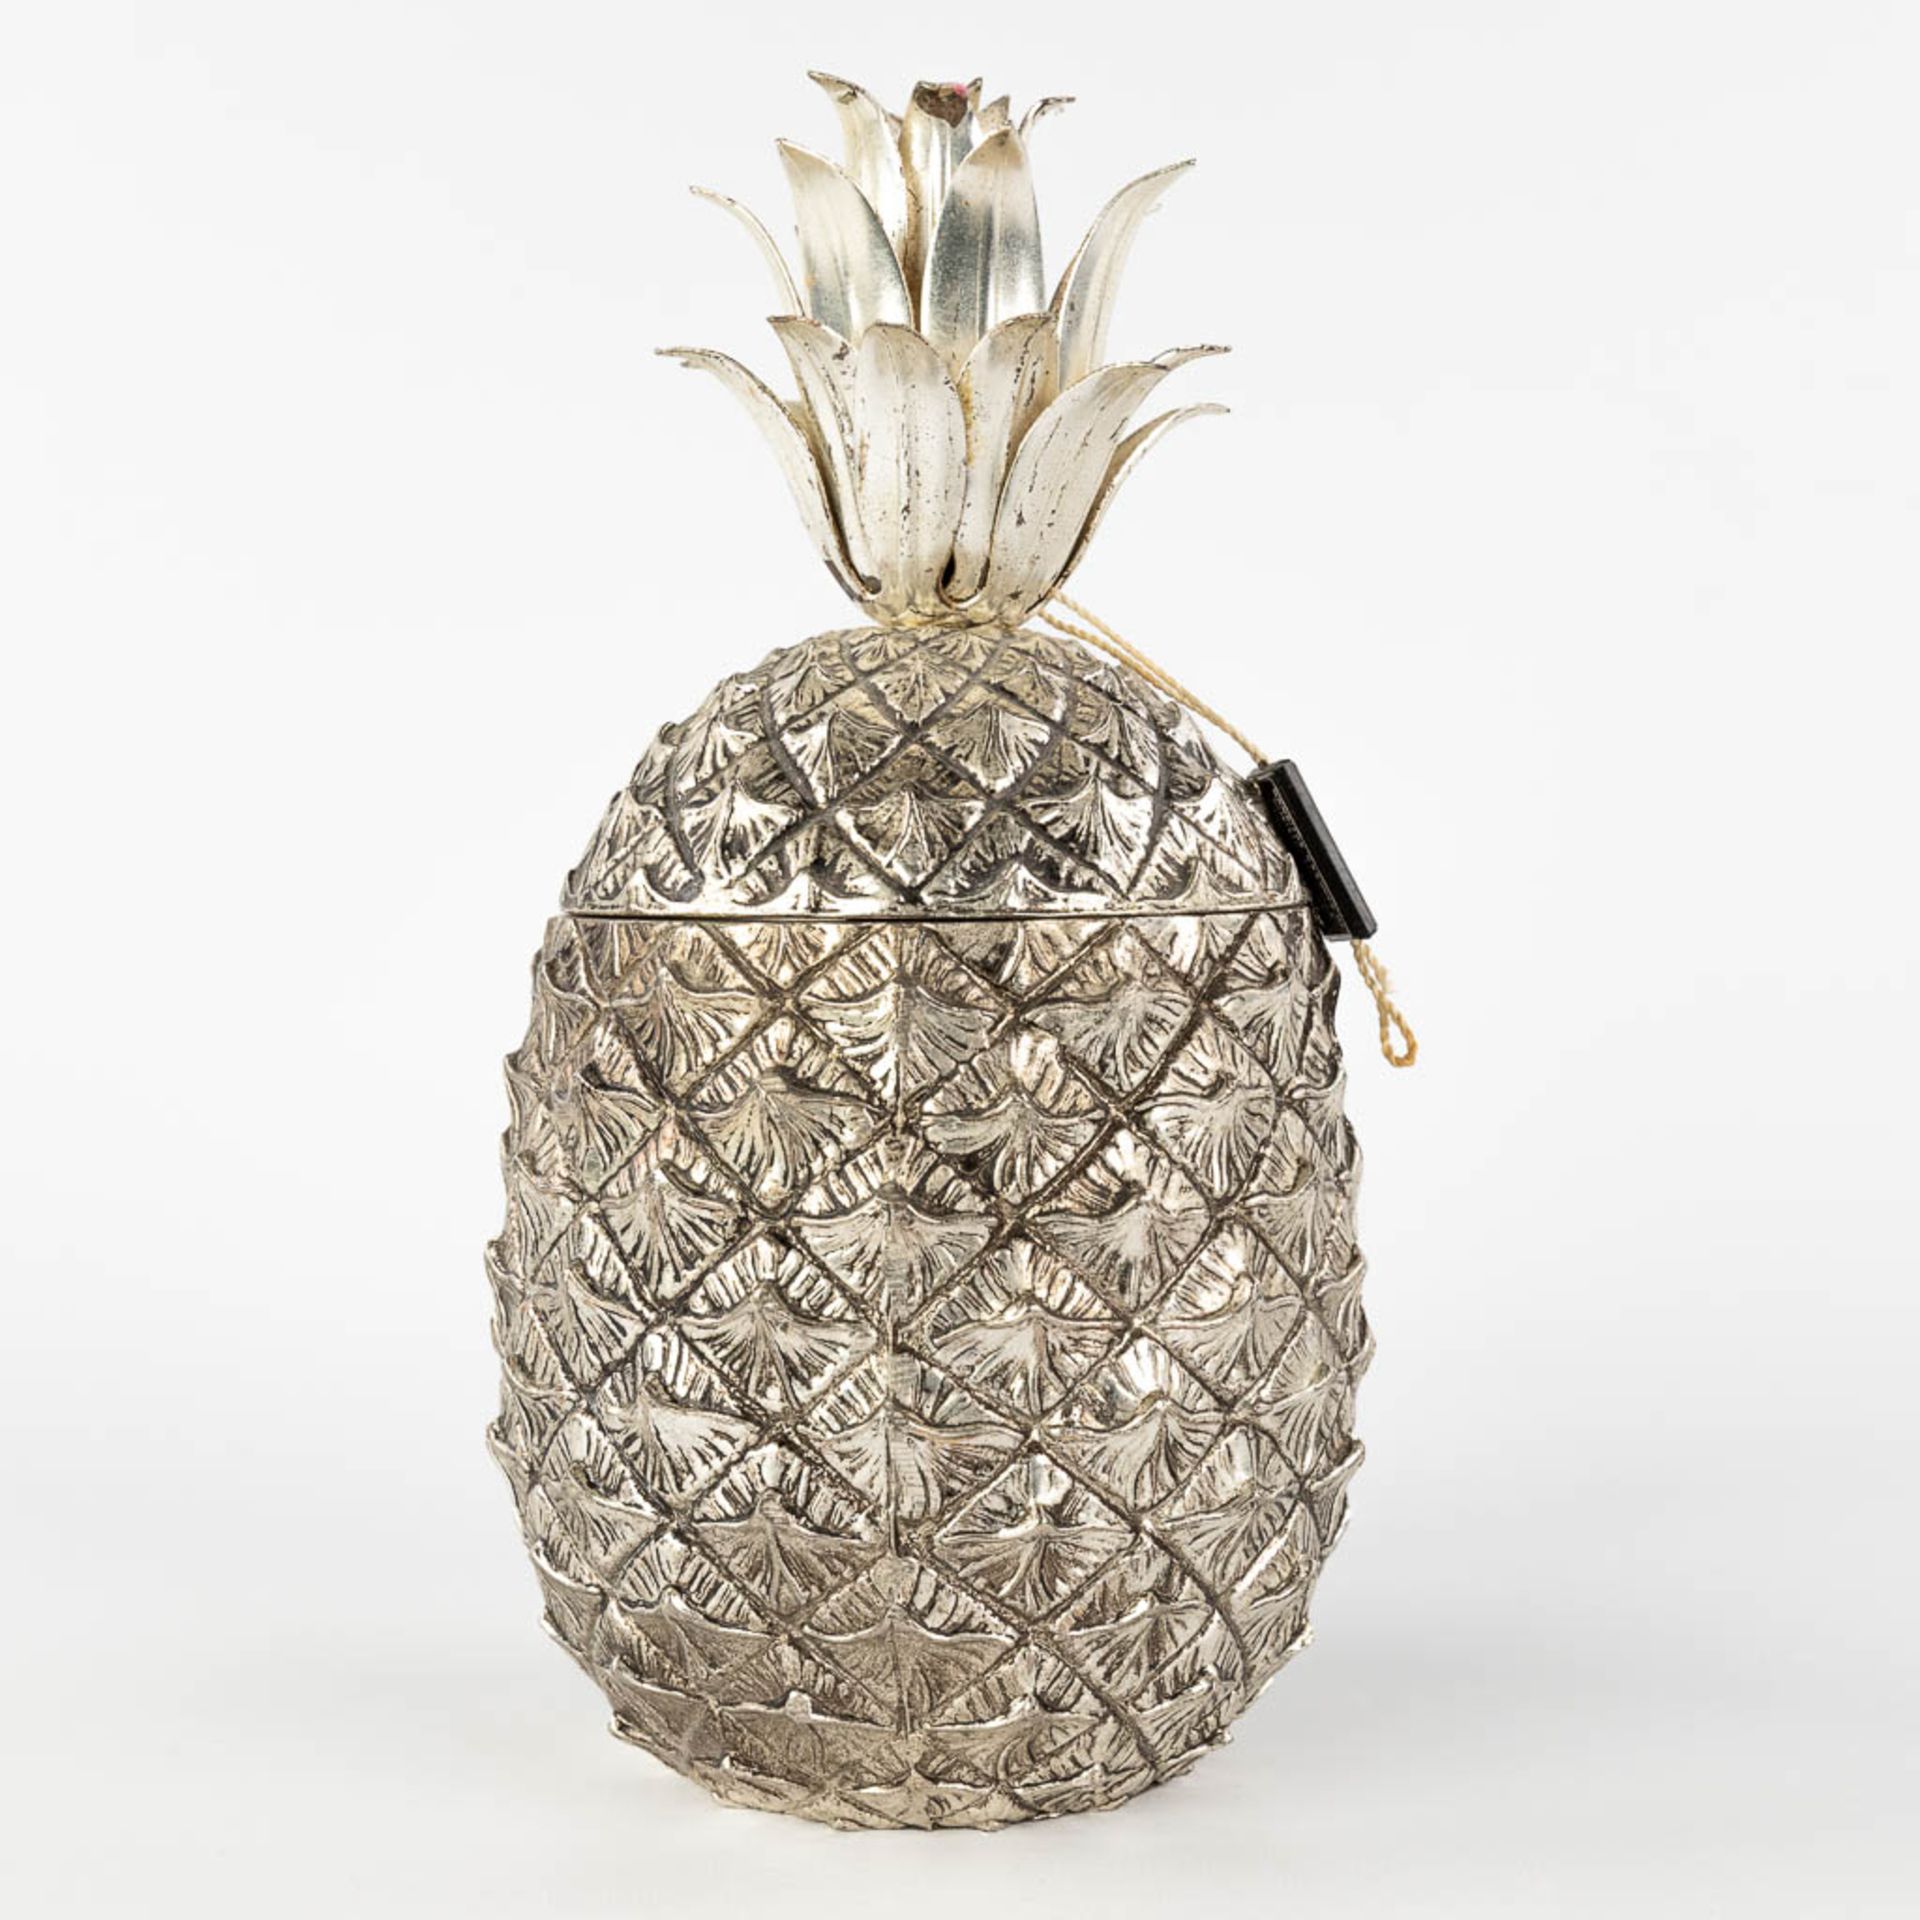 Mauro MANETTI (1946) 'Pineapple' an ice pail. (H:27 x D:13 cm) - Image 4 of 12